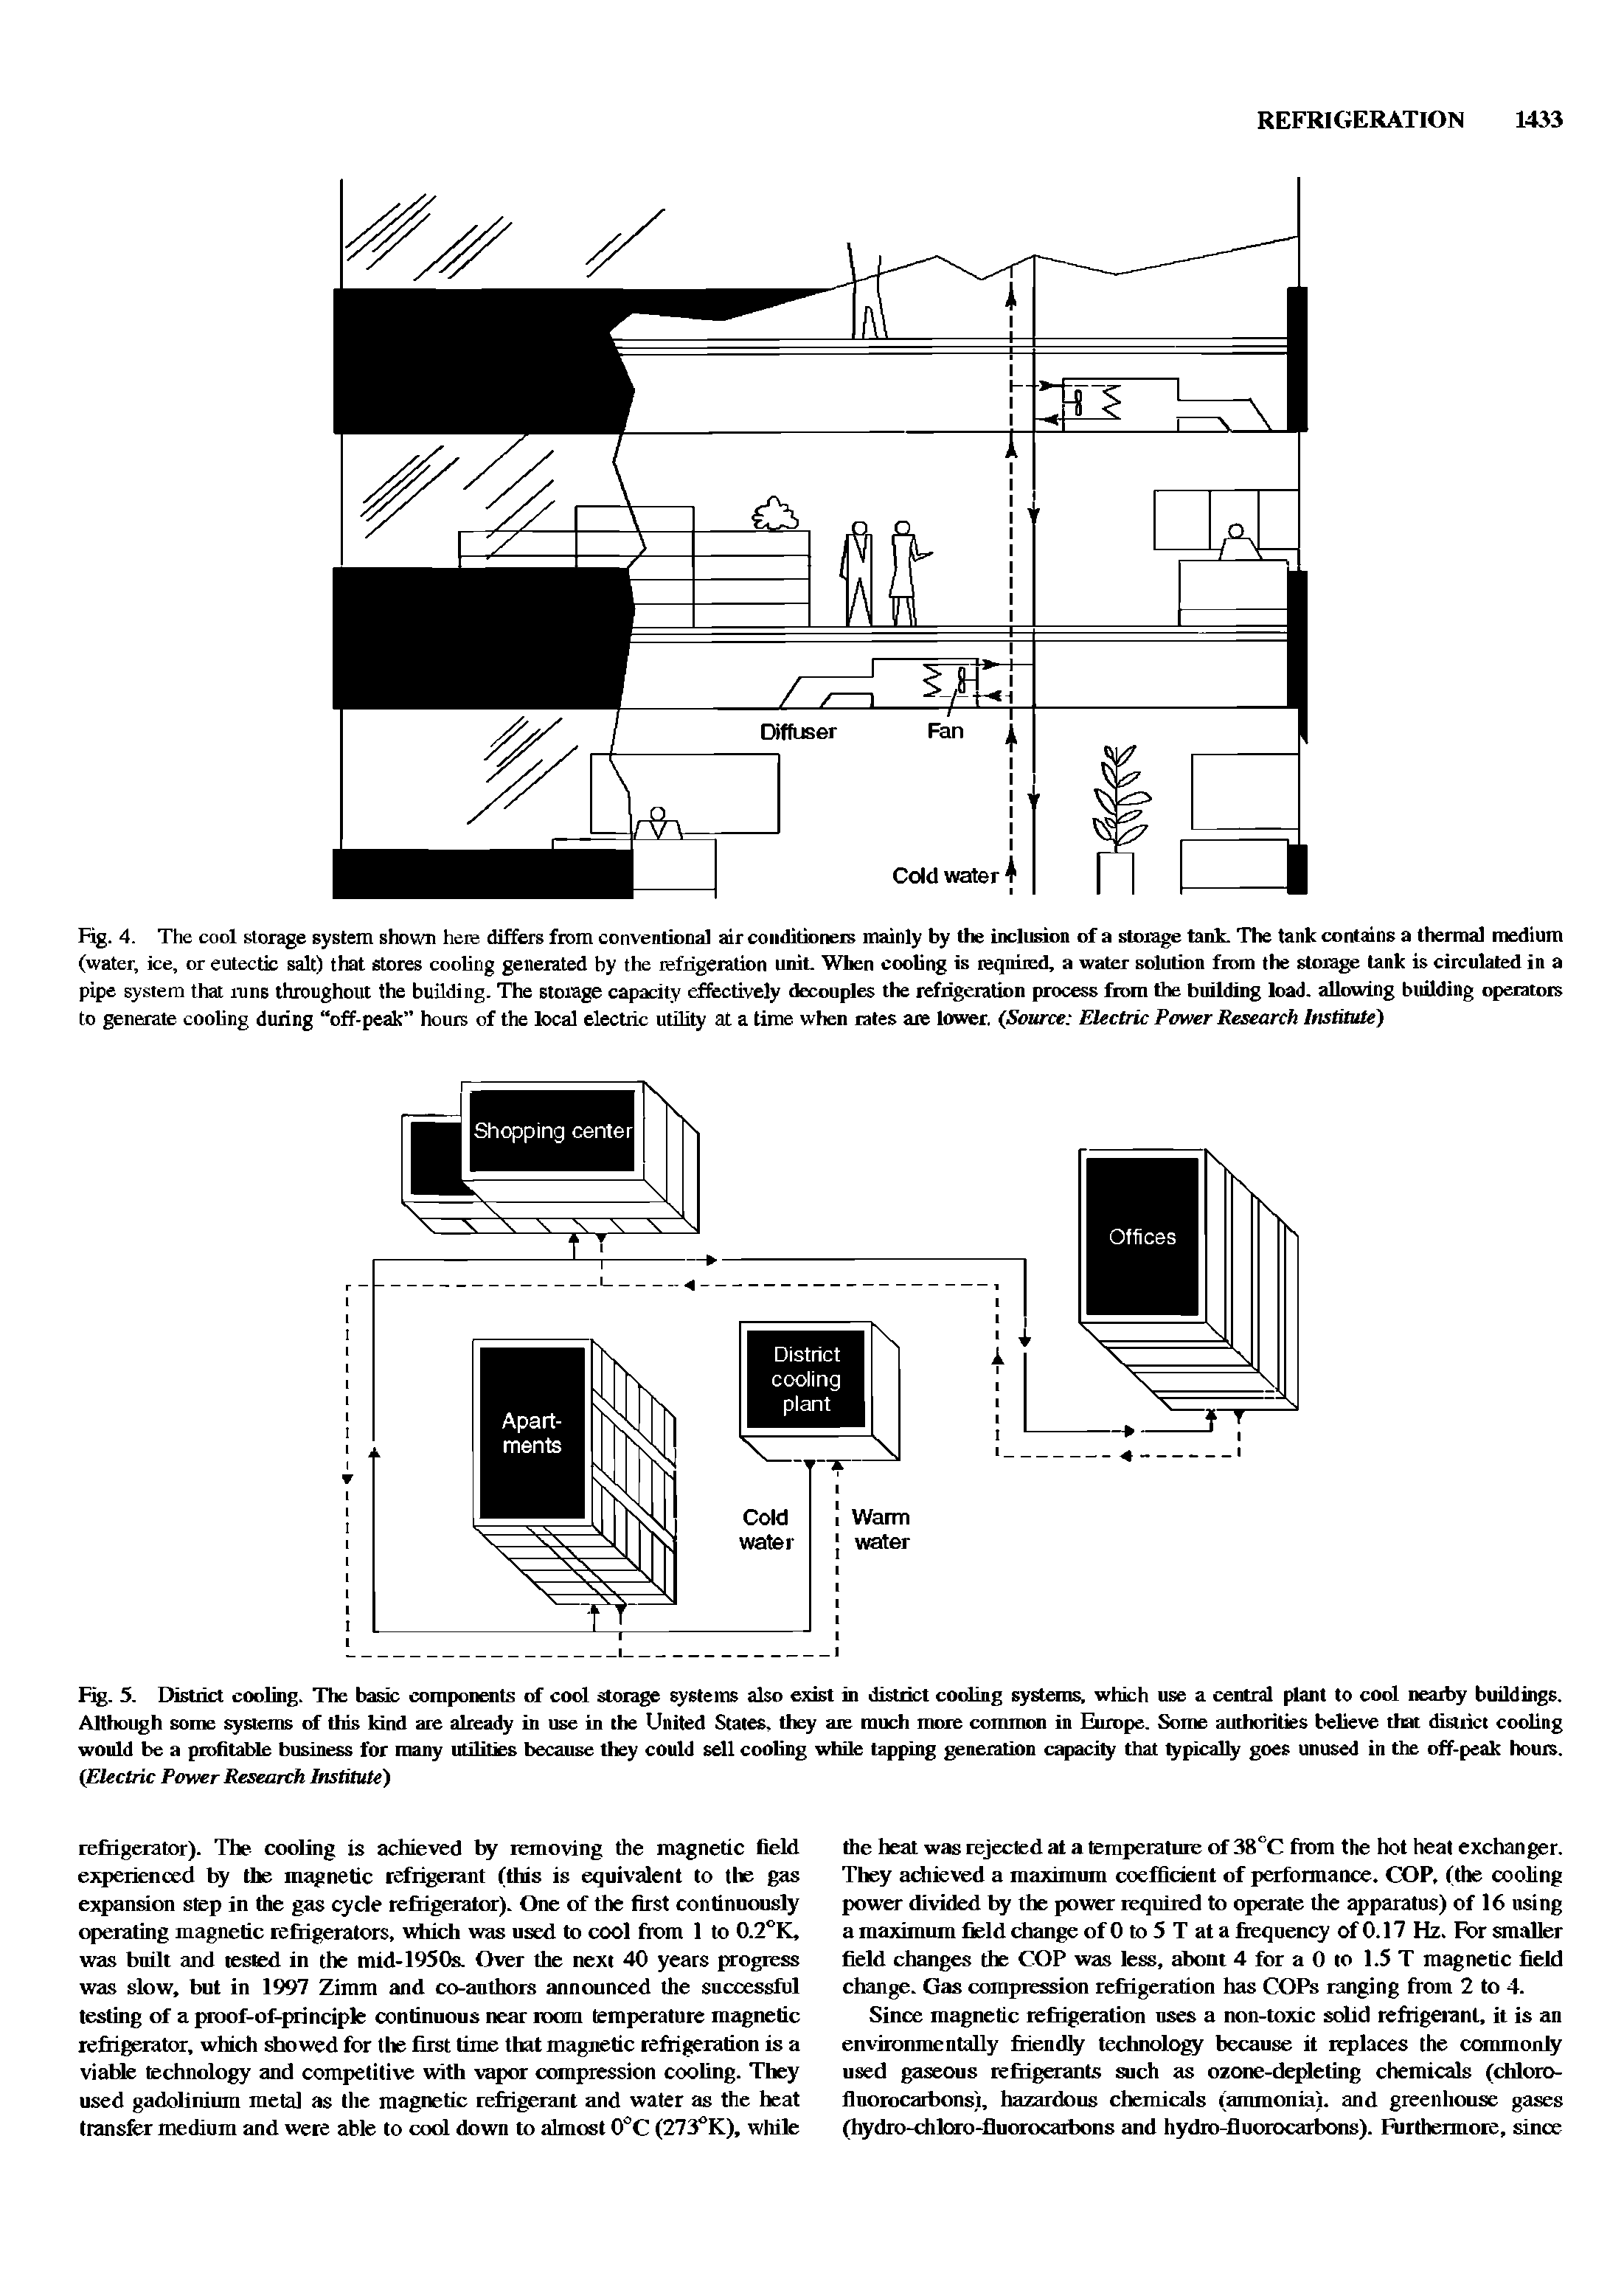 Fig. 5. District cooling. The basic components of cool storage systems also exist in district cooling systems, which use a central plant to cool nearby buildings. Although some systems of this land are already in use in the United States, they are much more common in Europe. Some authorities believe that district cooling would be a profitable business for many utilities because they could sell cooling while tapping generation capacity that typically goes unused in the off-peak hours. (Electric Power Research Institute)...